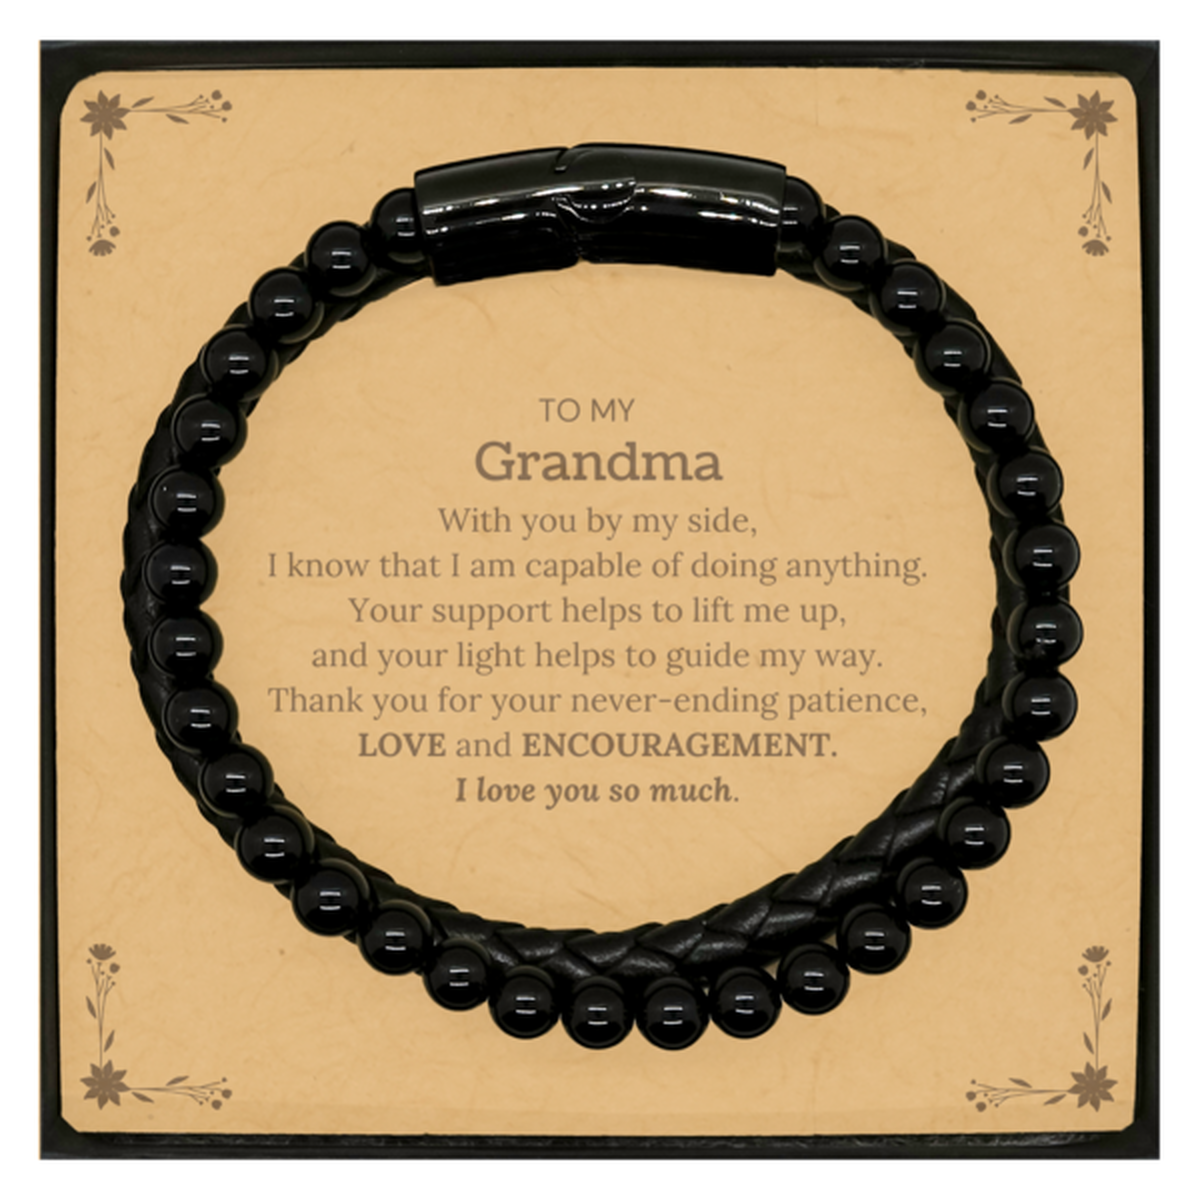 Appreciation Grandma Stone Leather Bracelets Gifts, To My Grandma Birthday Christmas Wedding Keepsake Gifts for Grandma With you by my side, I know that I am capable of doing anything. I love you so much